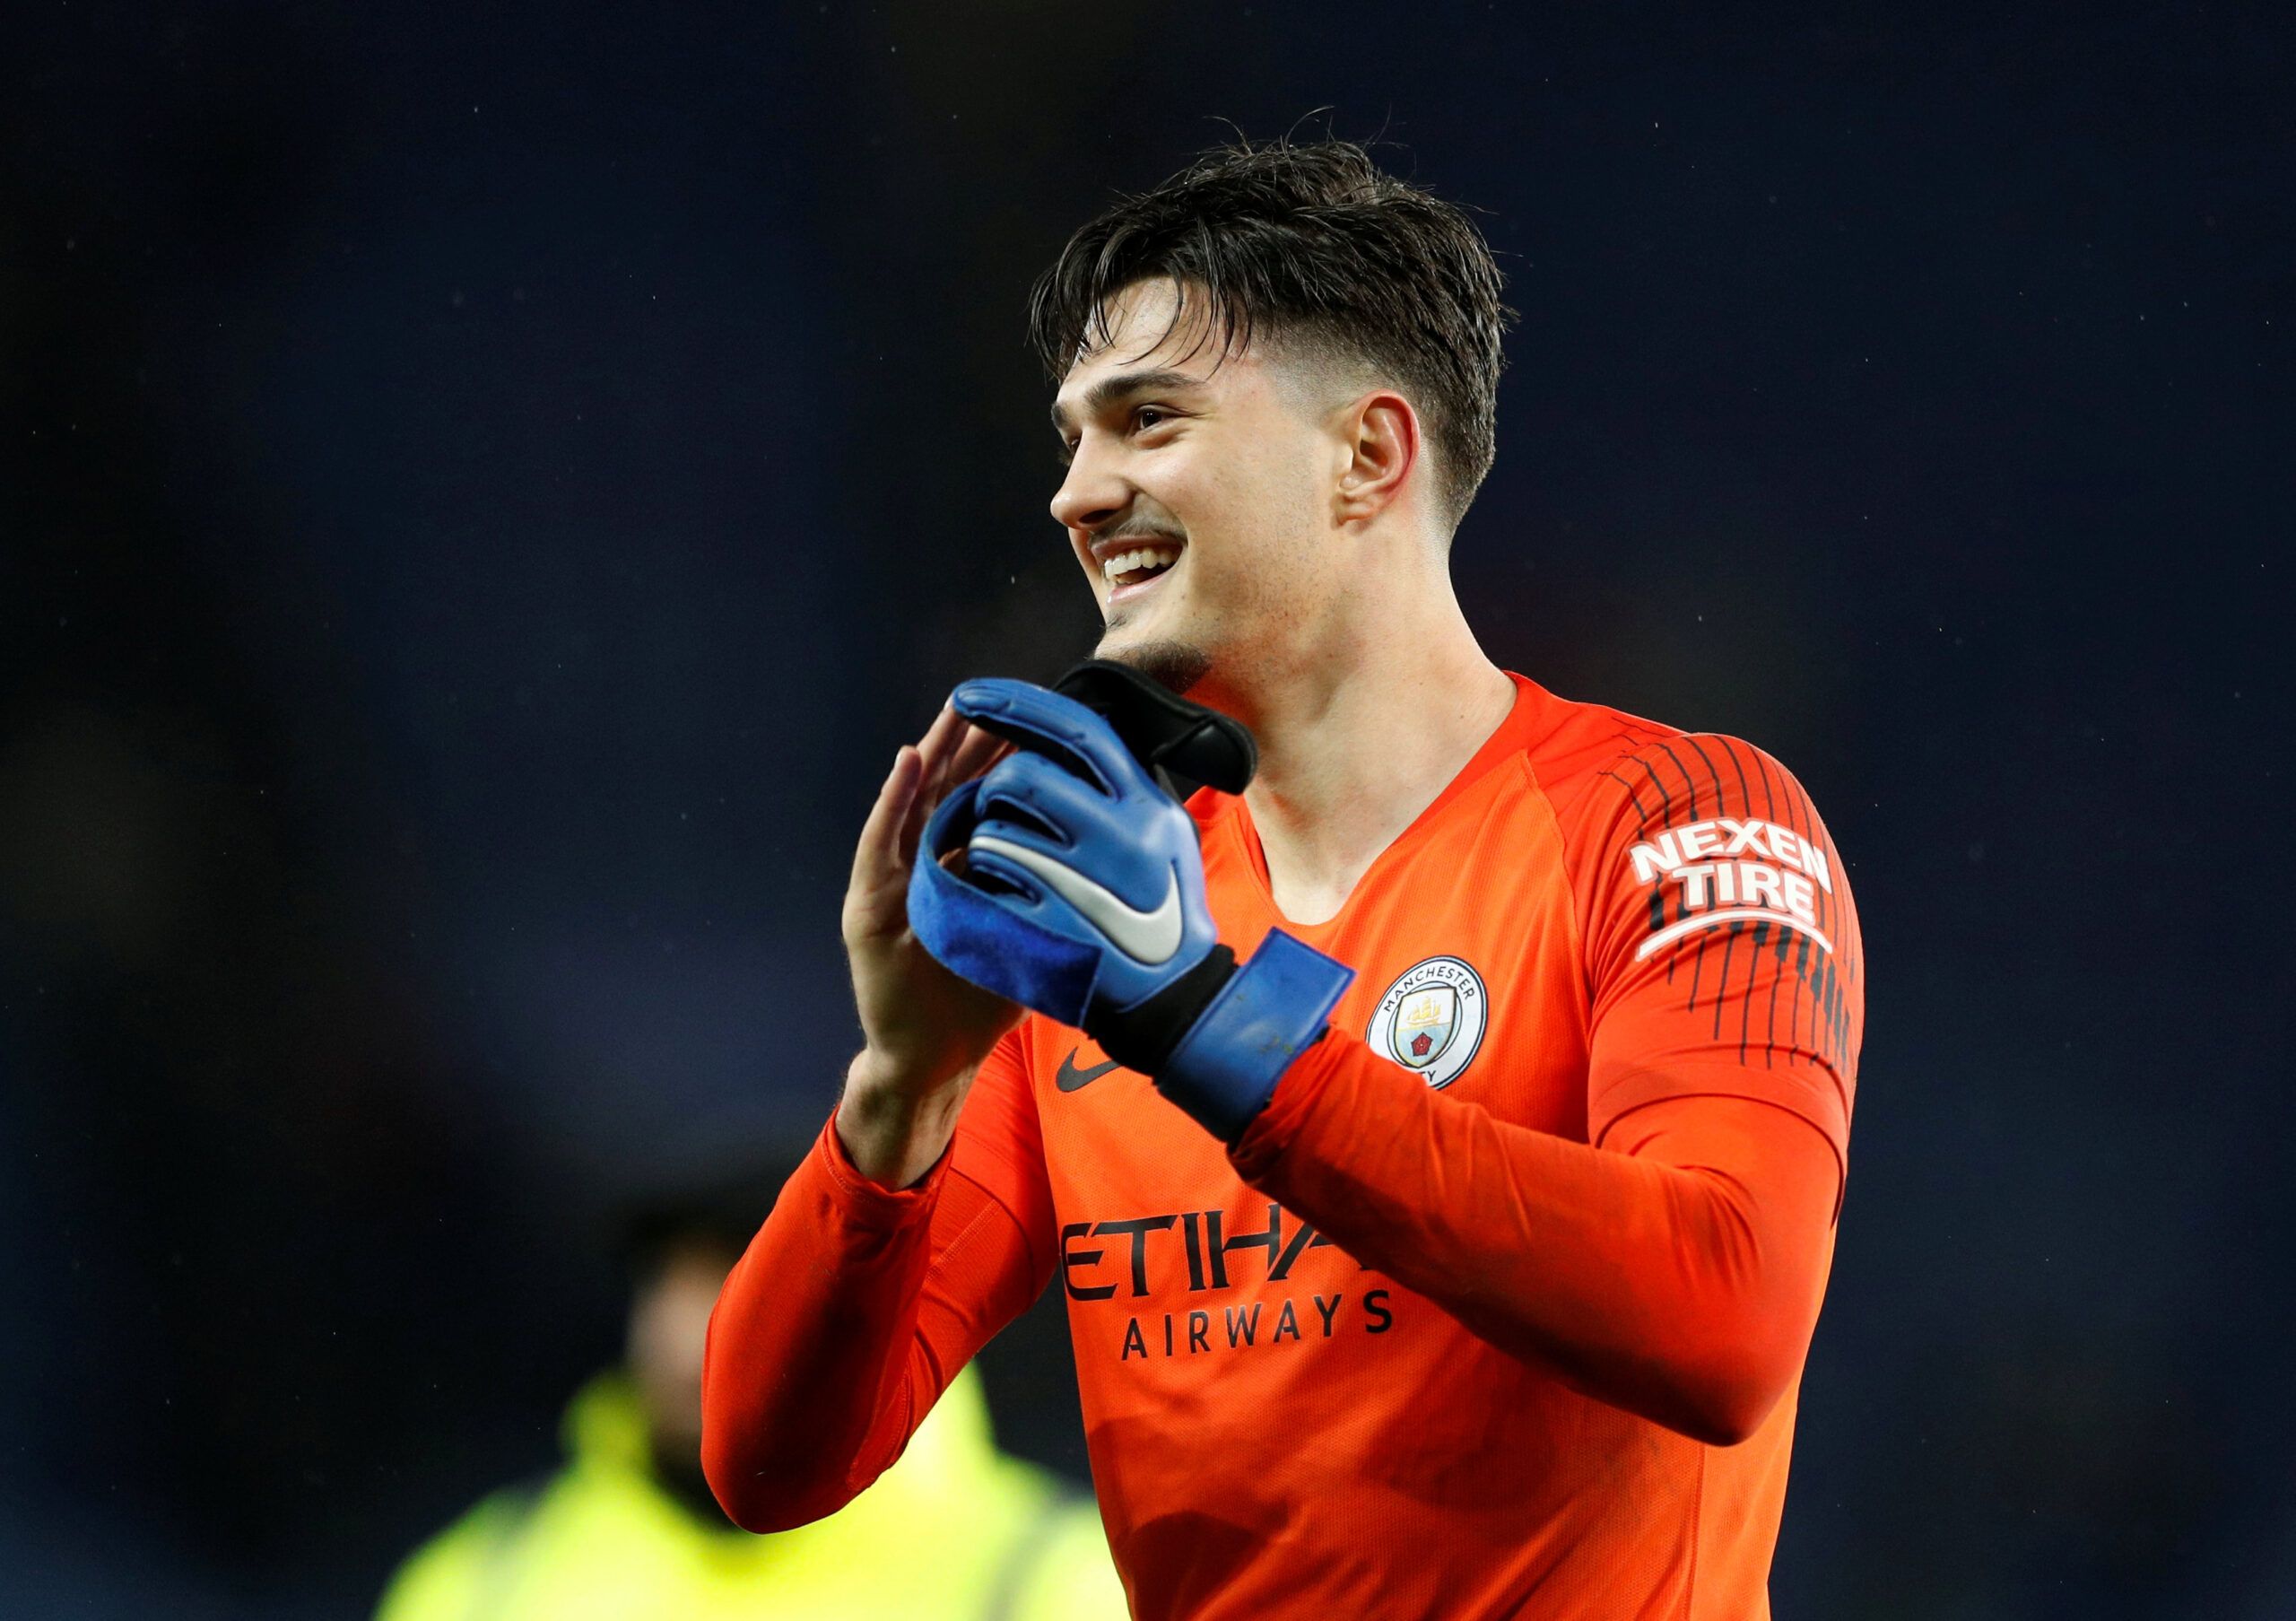 Soccer Football - Carabao Cup Quarter-Final - Leicester City v Manchester City - King Power Stadium, Leicester, Britain - December 18, 2018  Manchester City's Arijanet Muric celebrates after the match                Action Images via Reuters/John Sibley  EDITORIAL USE ONLY. No use with unauthorized audio, video, data, fixture lists, club/league logos or 